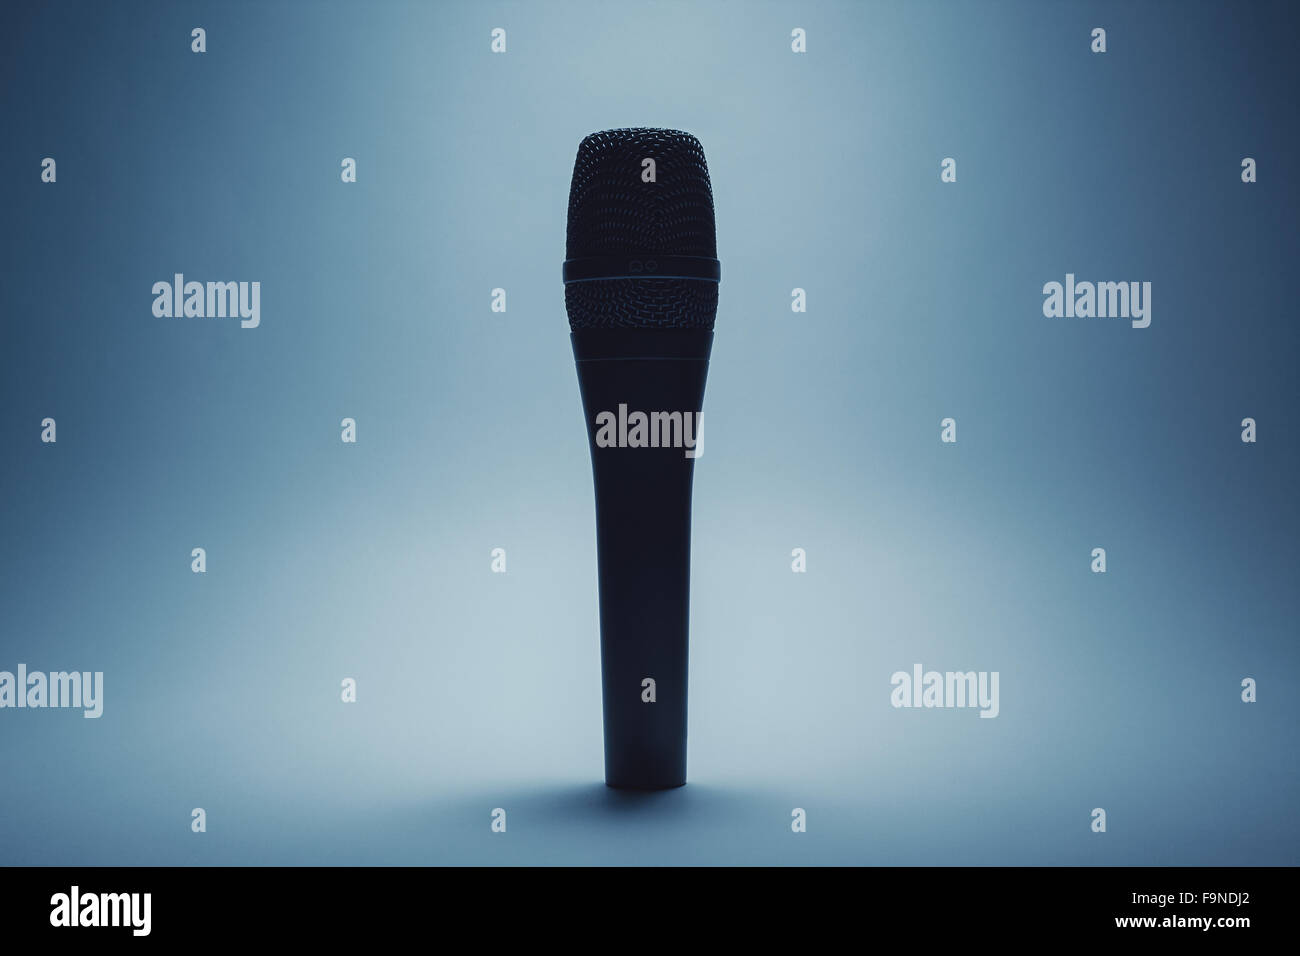 Closeup view of a modern microphone, highlighted parts by illumination. Stock Photo